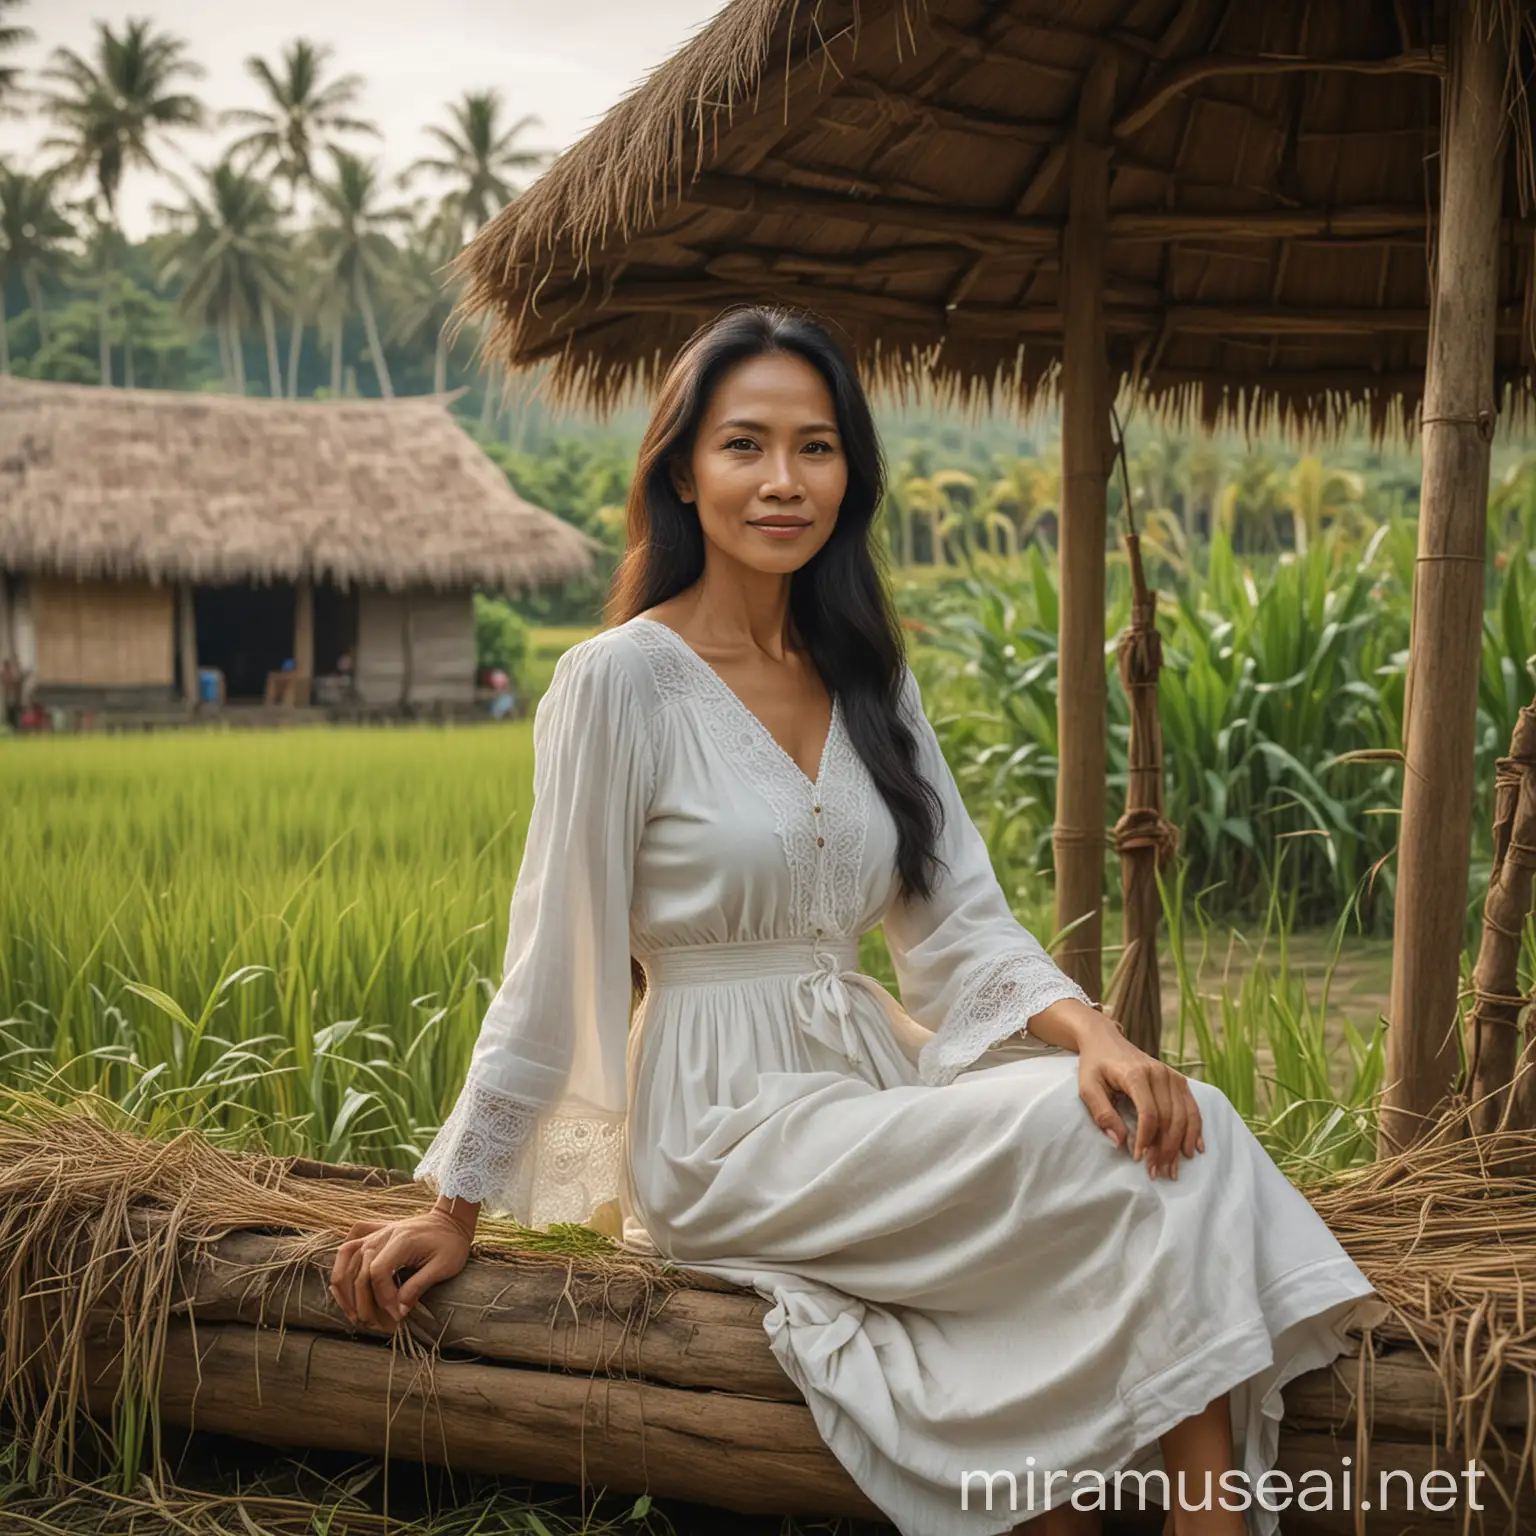 Indonesian Woman in White Dress Relaxing by Paddy Field Hut